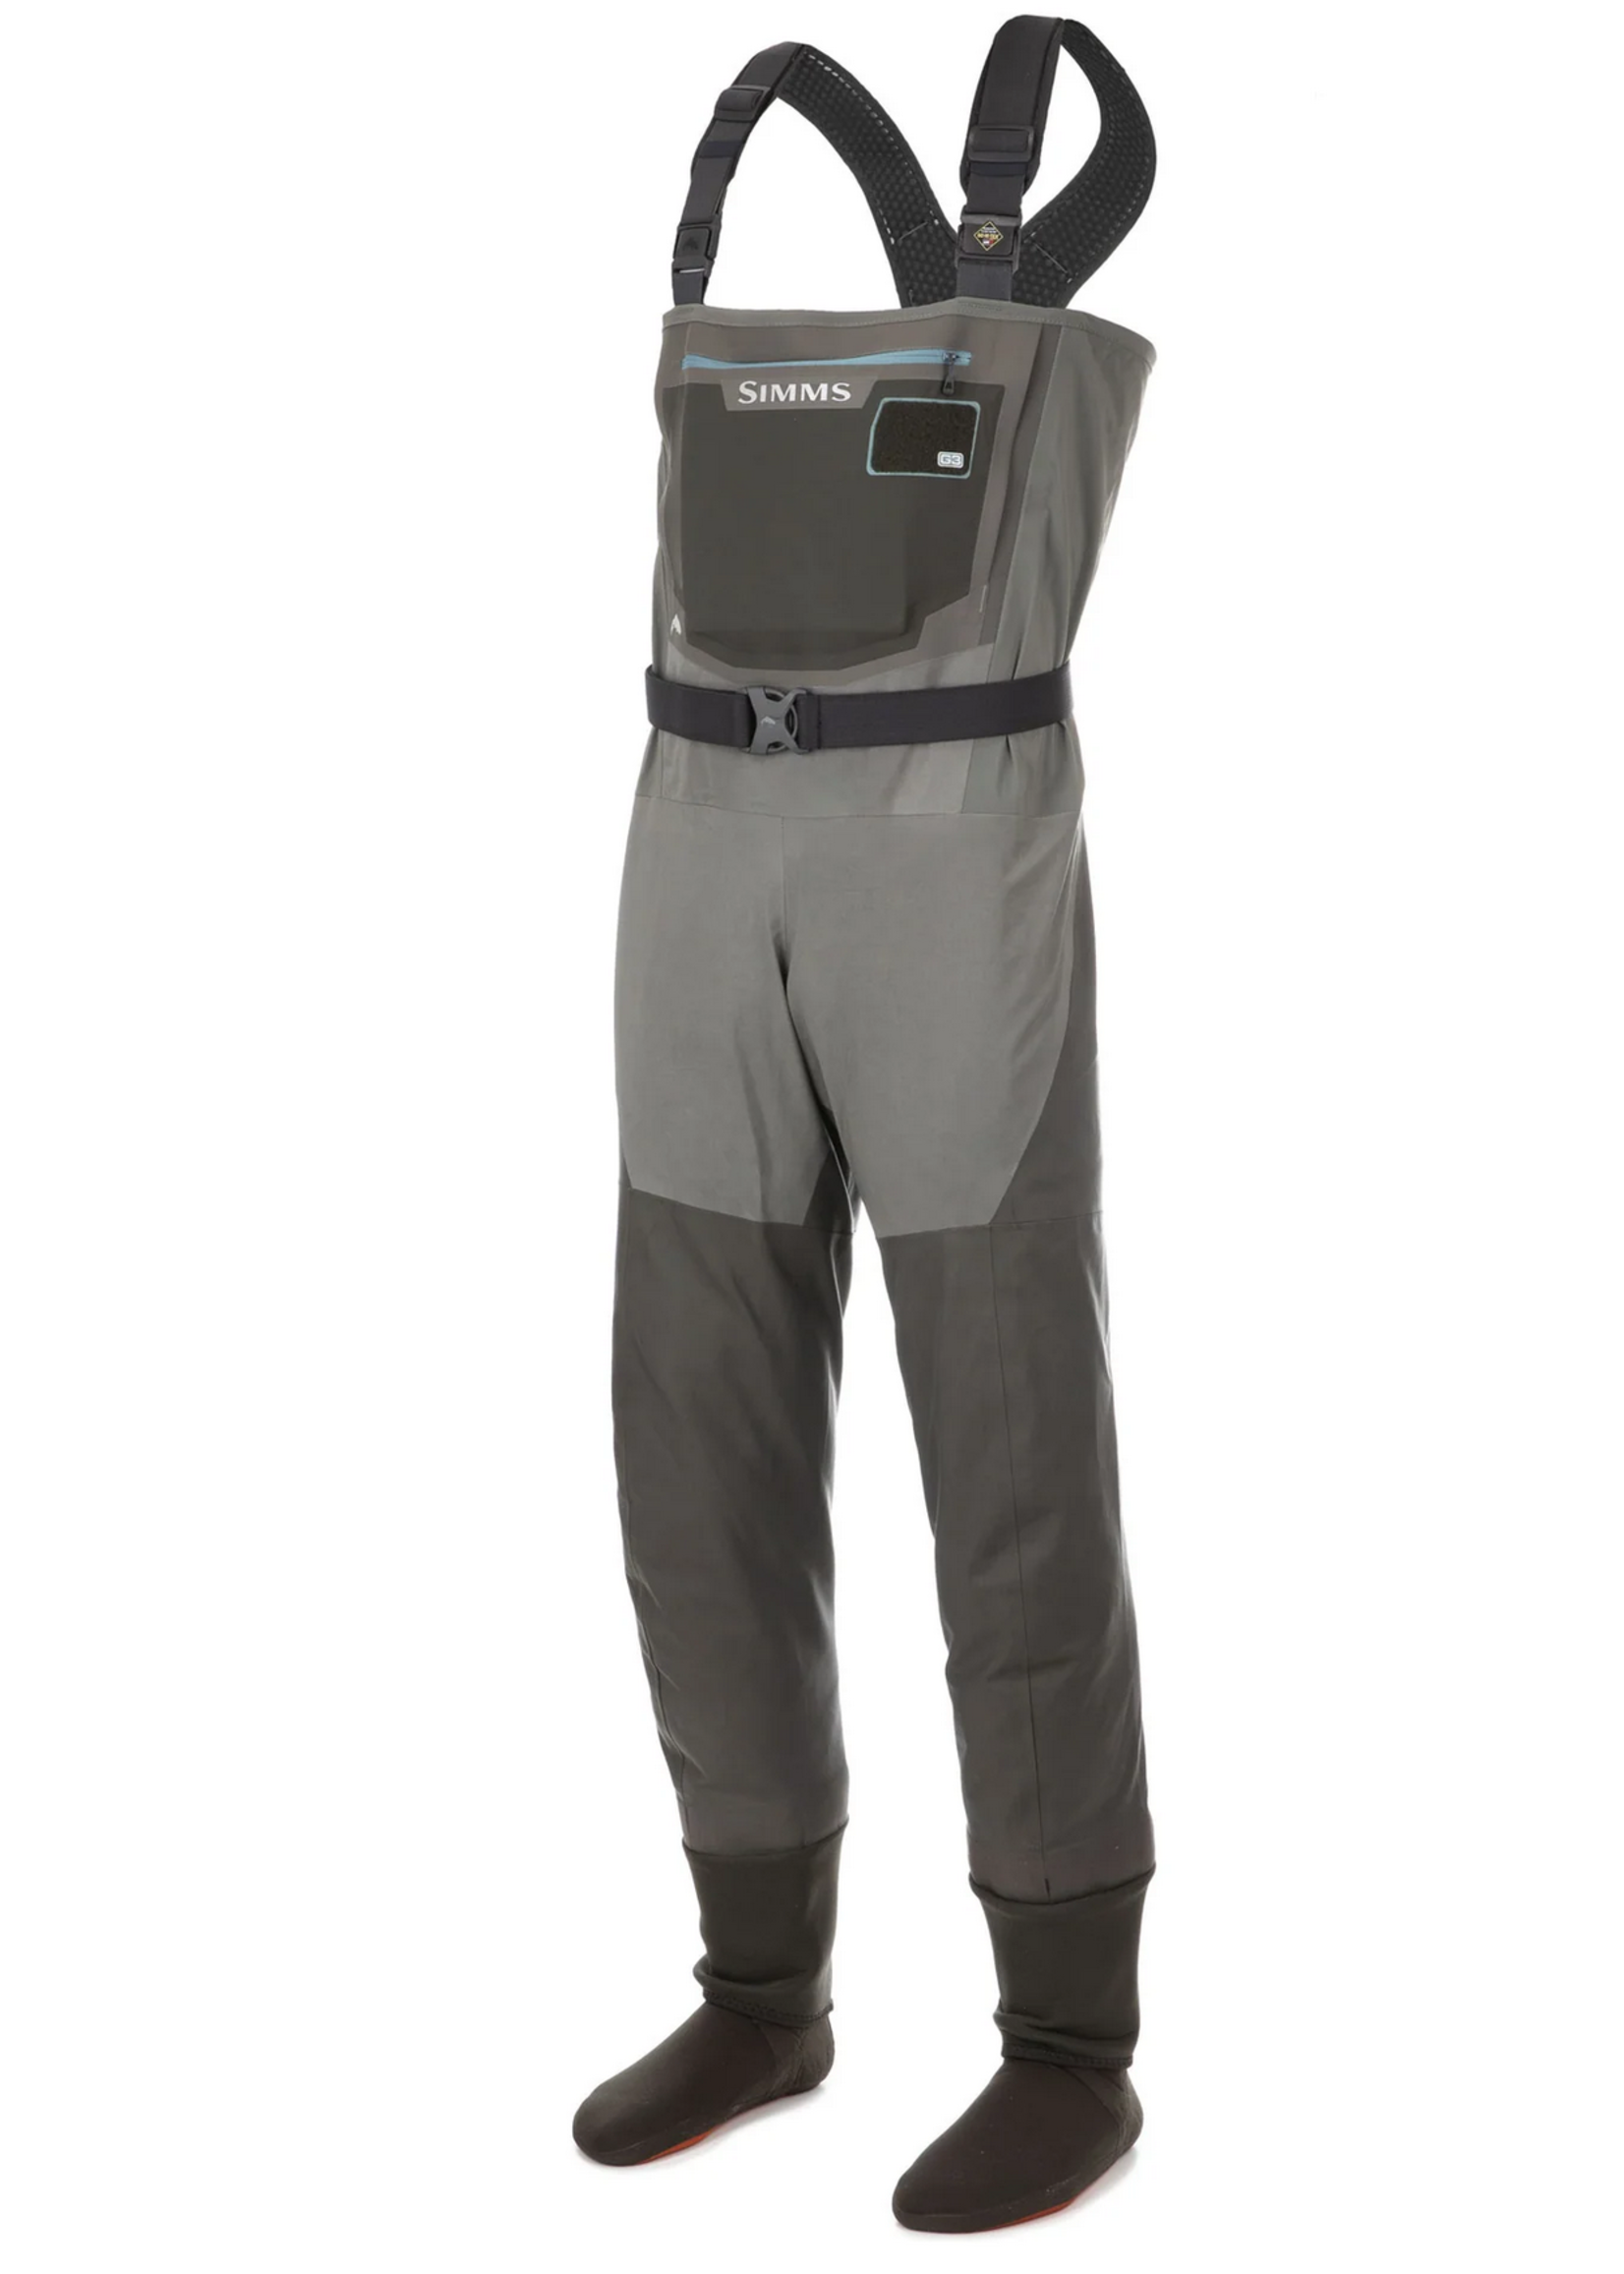 Simms Women's G3 Stockingfoot Waders - Sweetwater Fly Shop